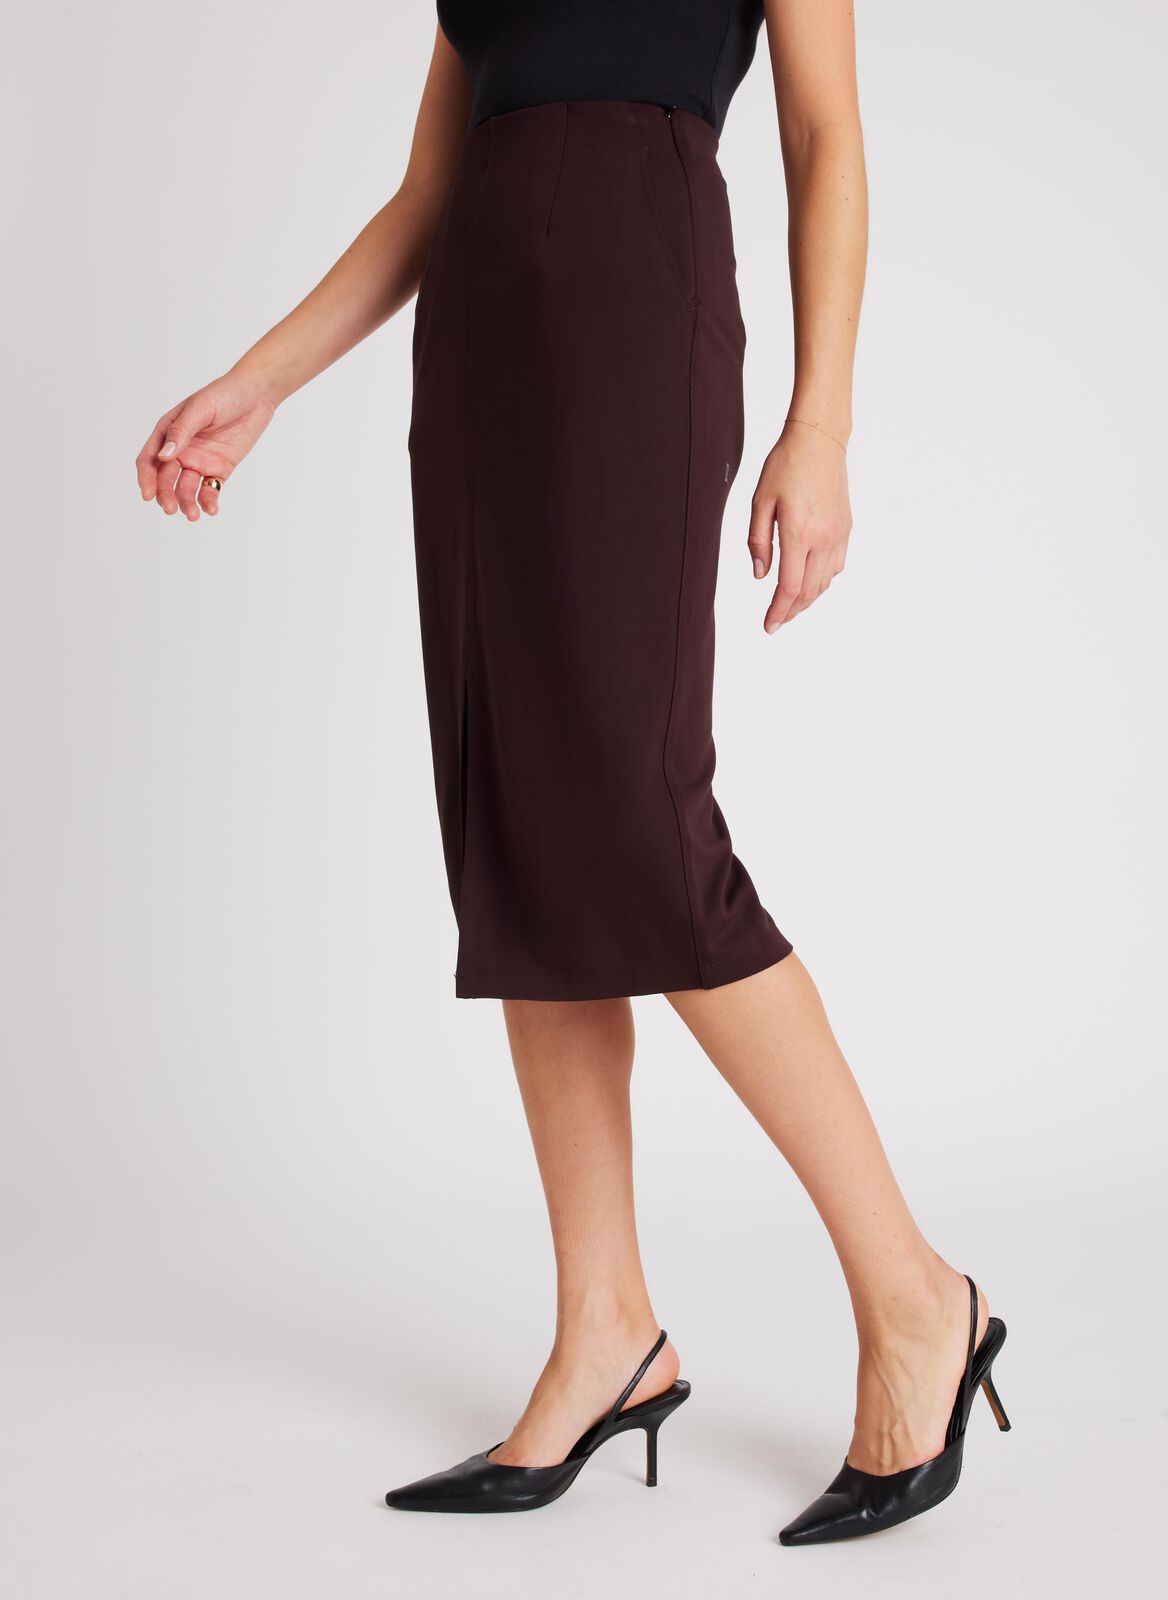 Kit and Ace — Serenity Double Knit Pencil Skirt